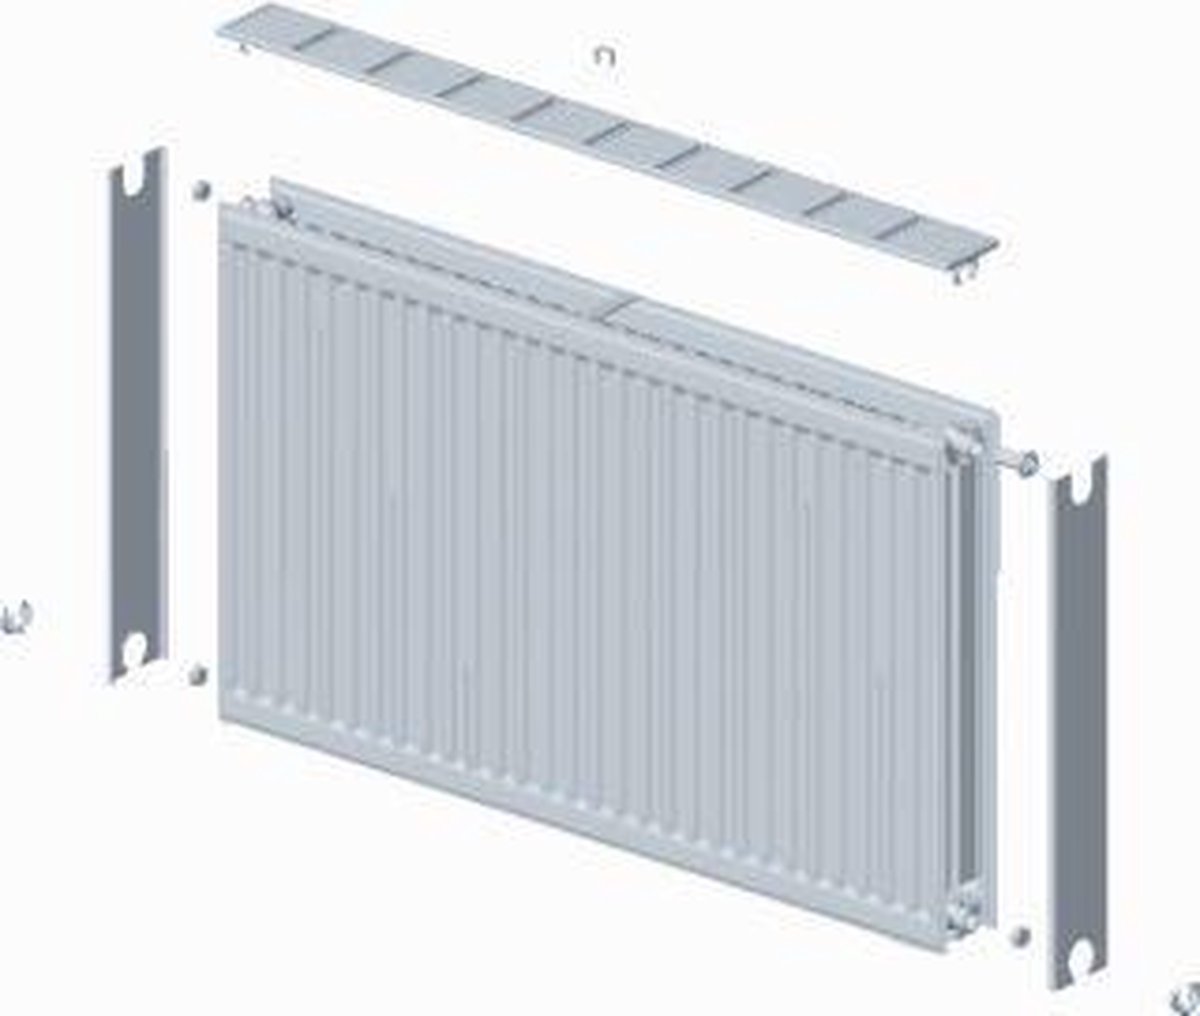 Stelrad paneelradiator Novello, staal, wit, (hxlxd) 400x2600x100mm, 22